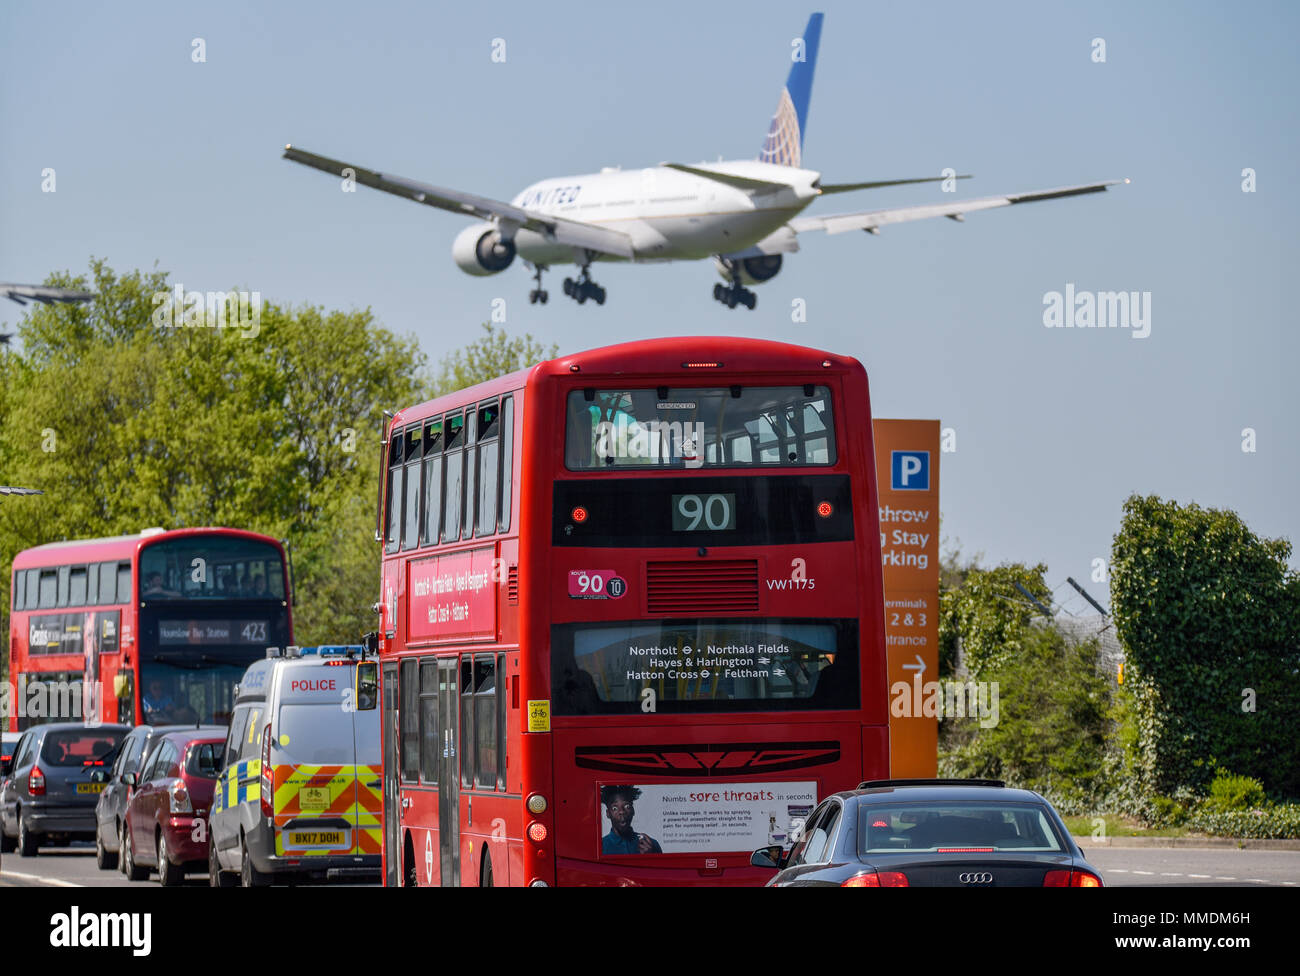 United Airlines Boeing 777 jet plane coming in to land at London Heathrow Airport, UK, in blue sky, over a red London bus, police vehicle Stock Photo